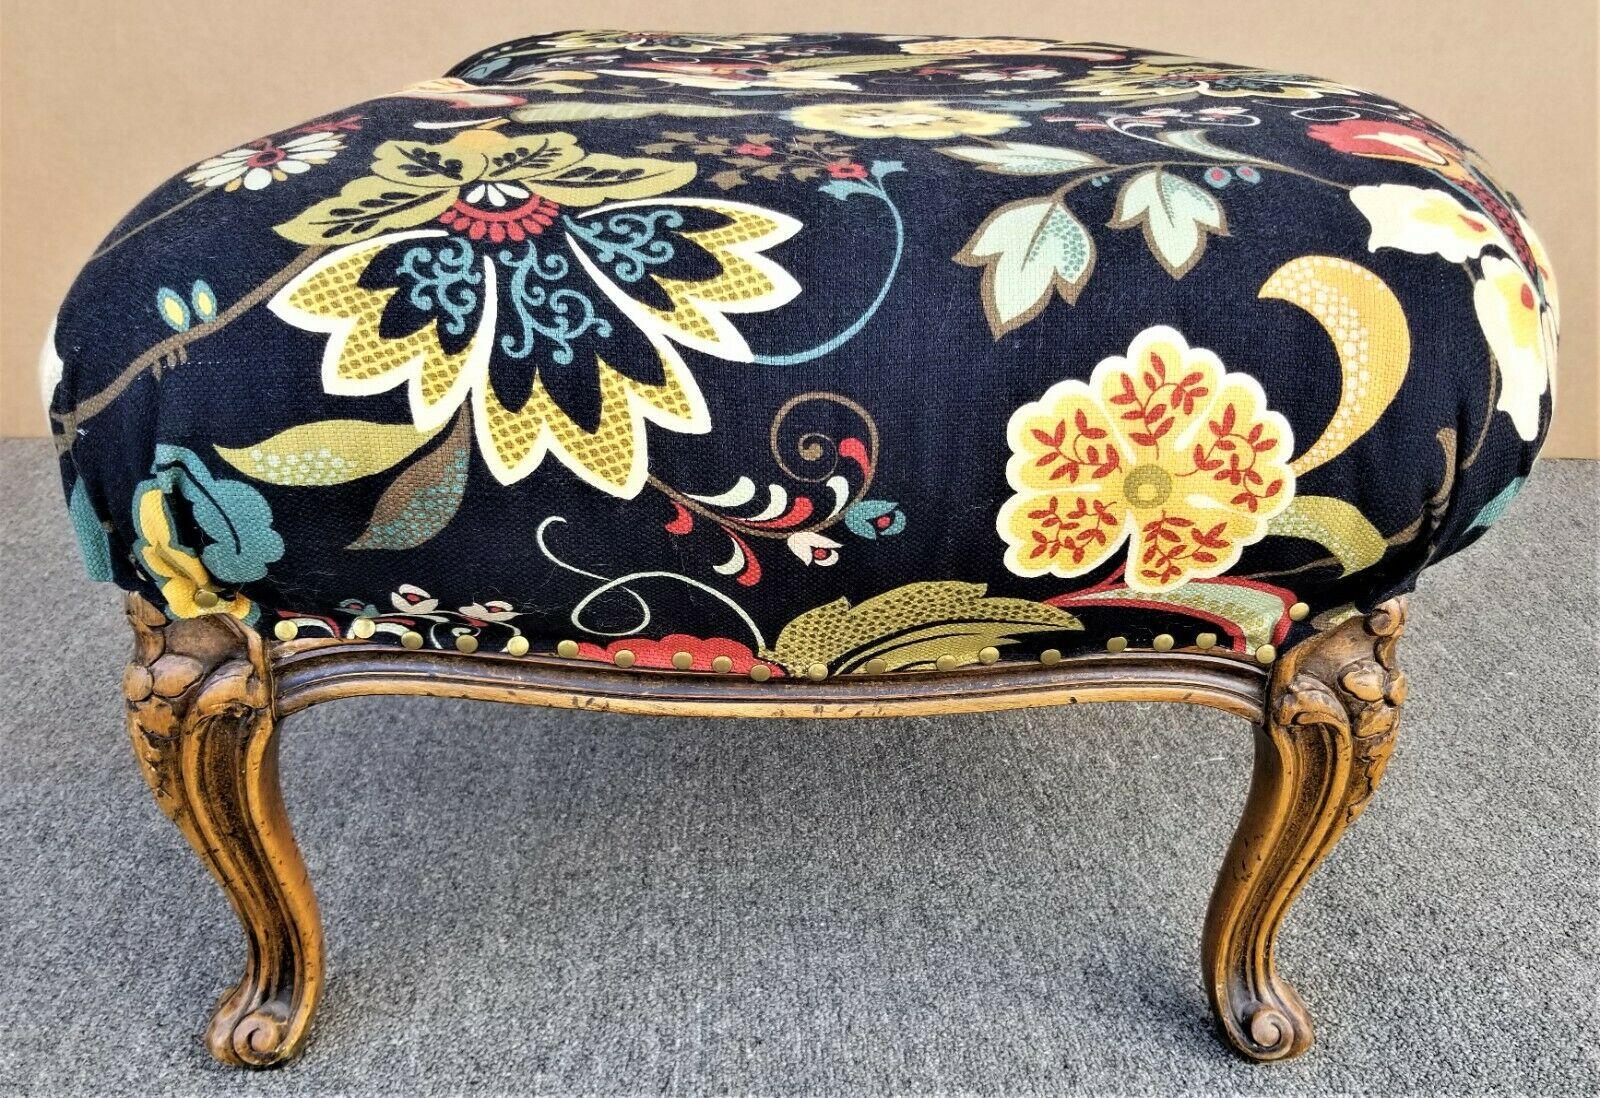 Late 20th Century Chateau d'Ax French Provincial Pouf Ottoman